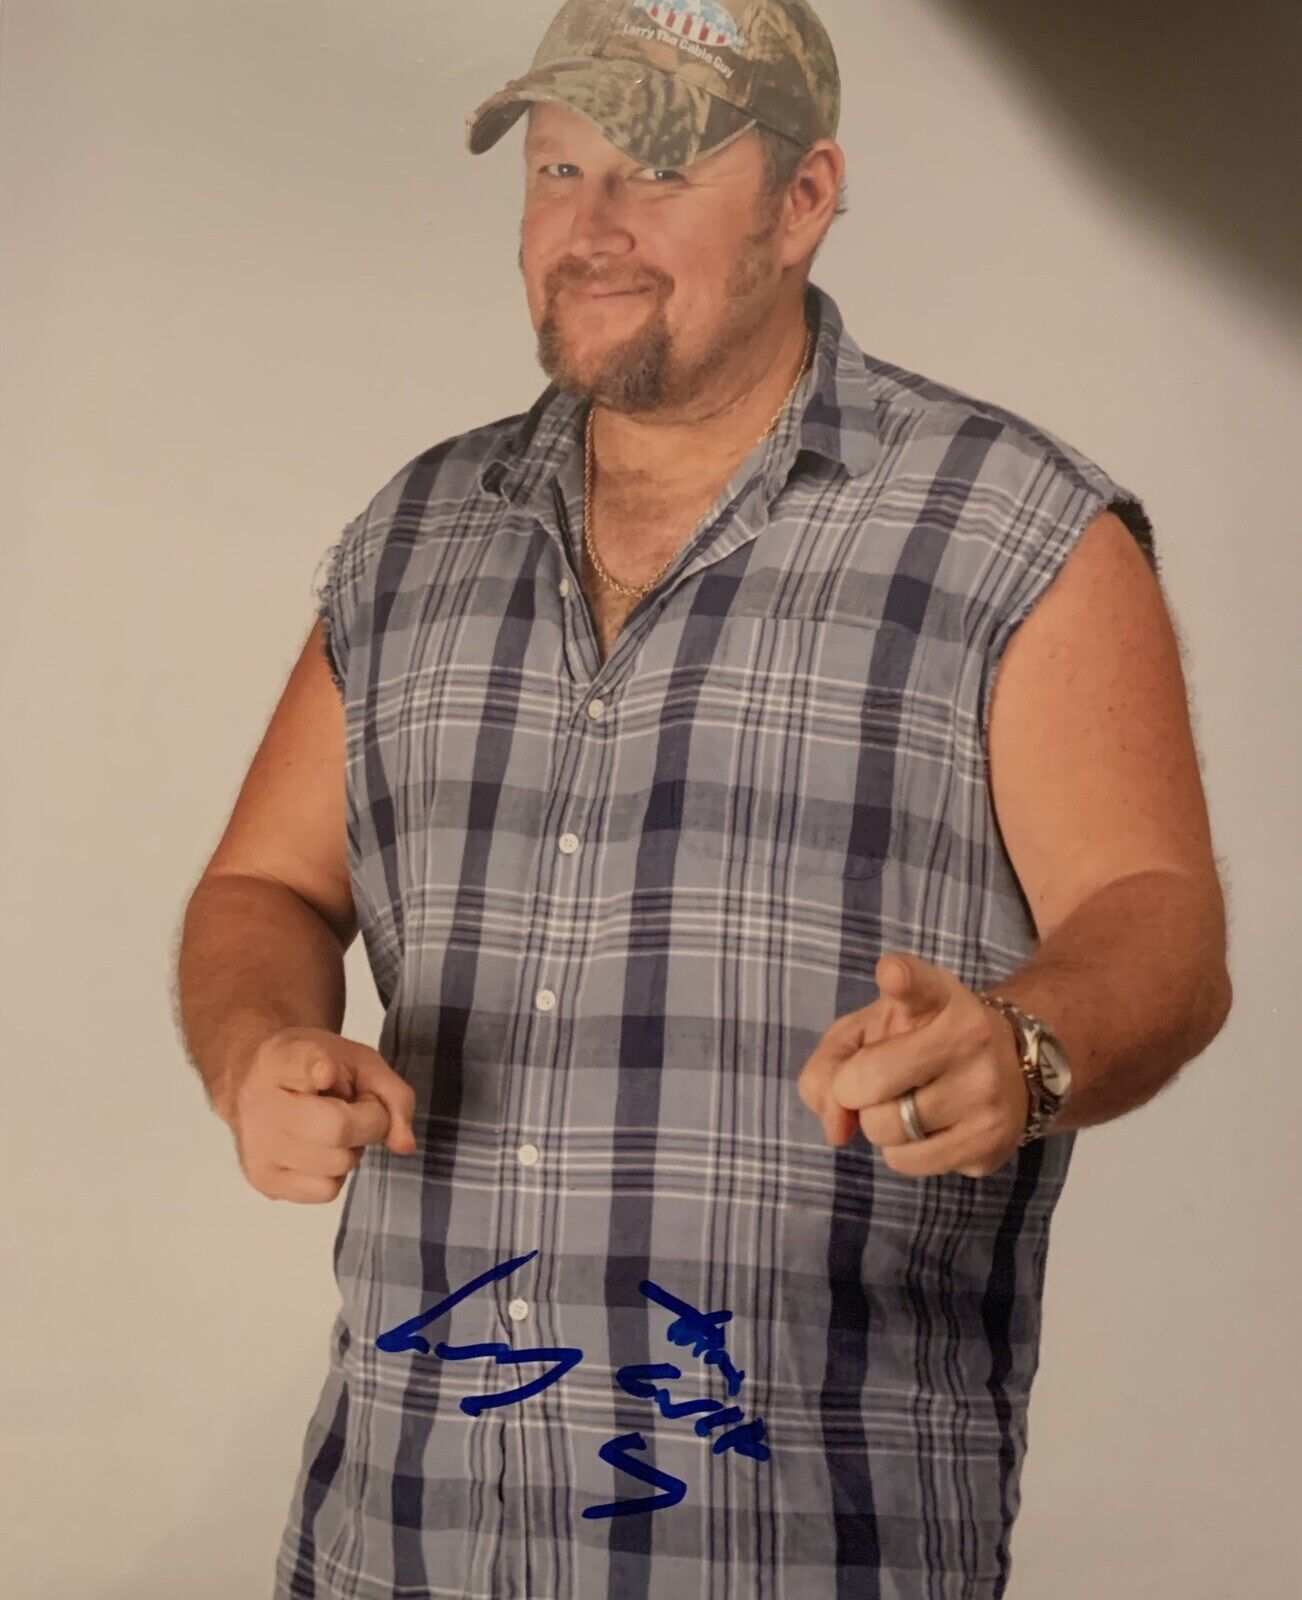 larry the cable guy signed Auto 8x10 Photo Poster painting Pic